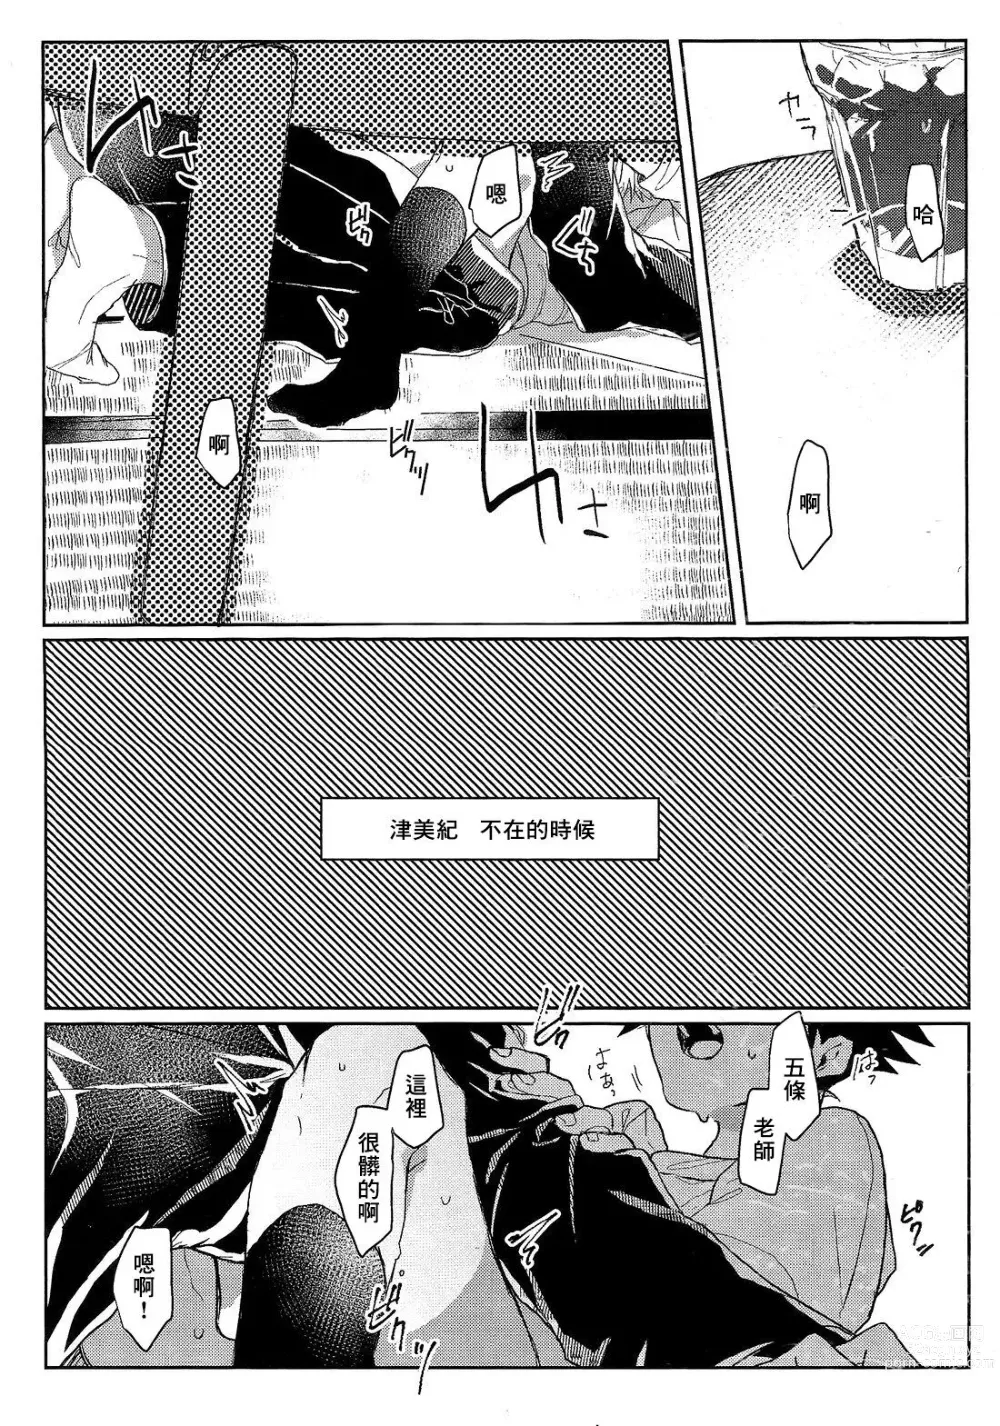 Page 3 of doujinshi Immoralist丨背德者